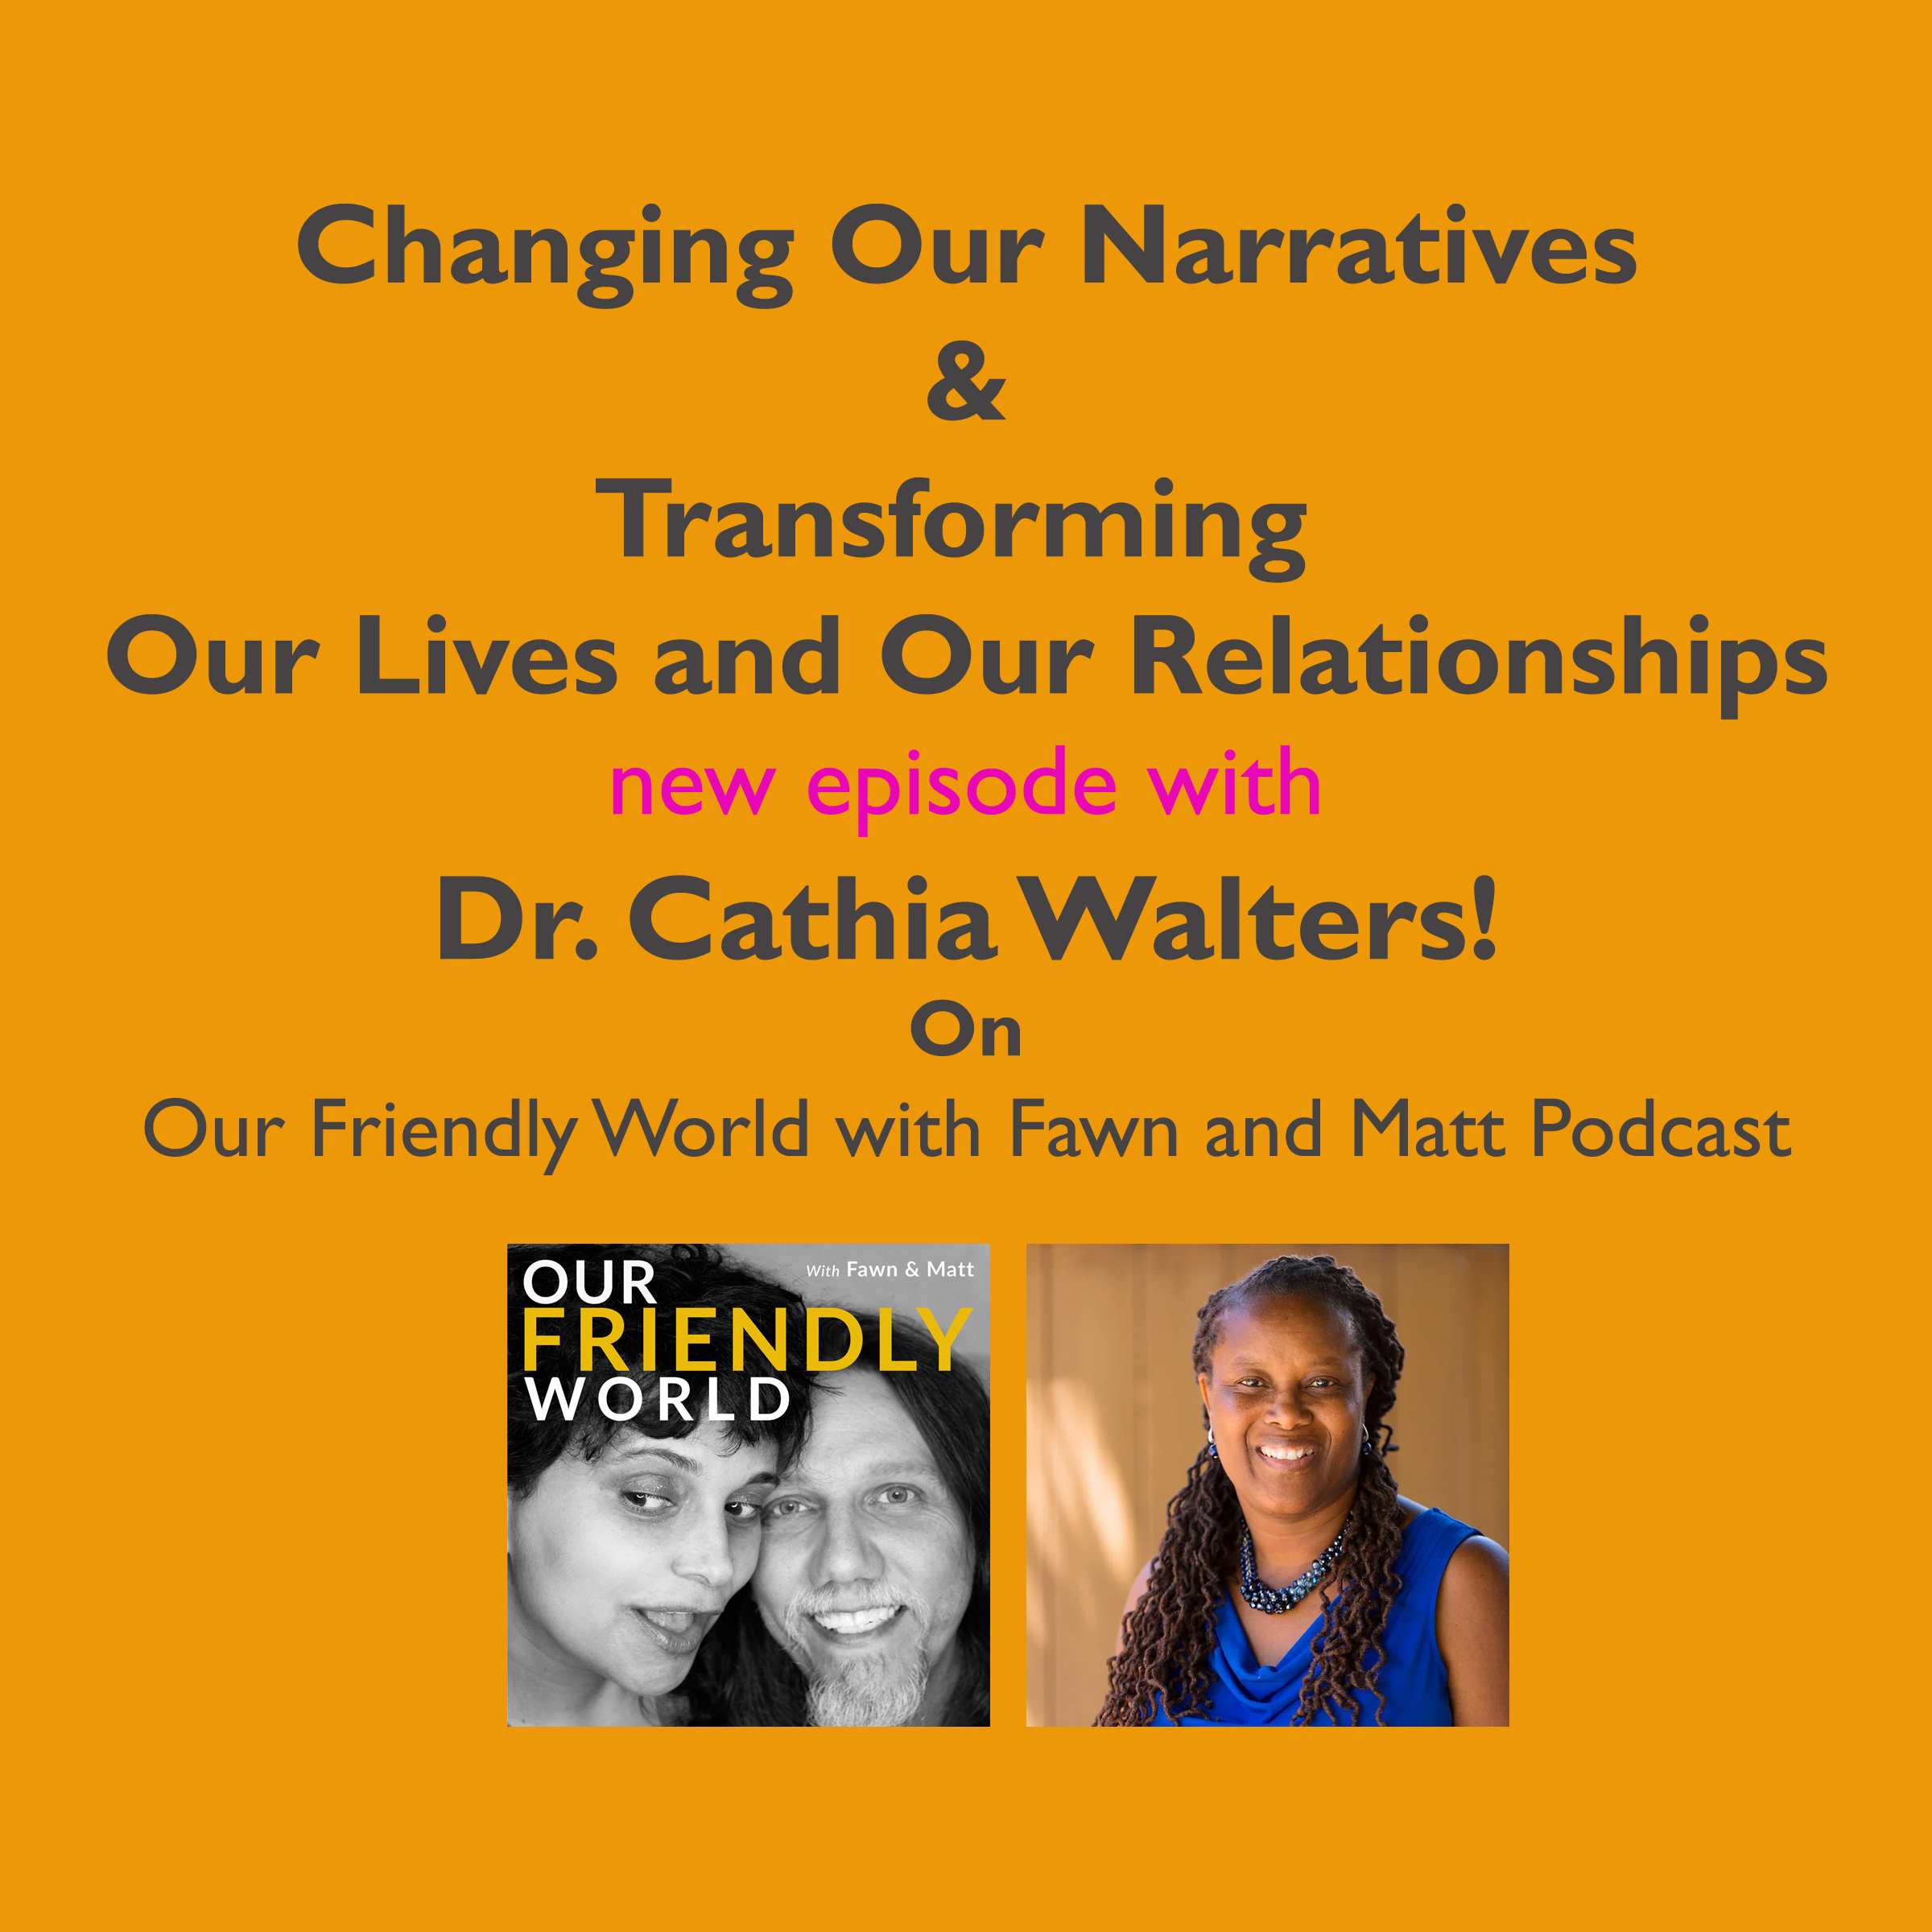 Changing Our Narratives for A kinder, Friendlier World with Dr. Cathia Walters